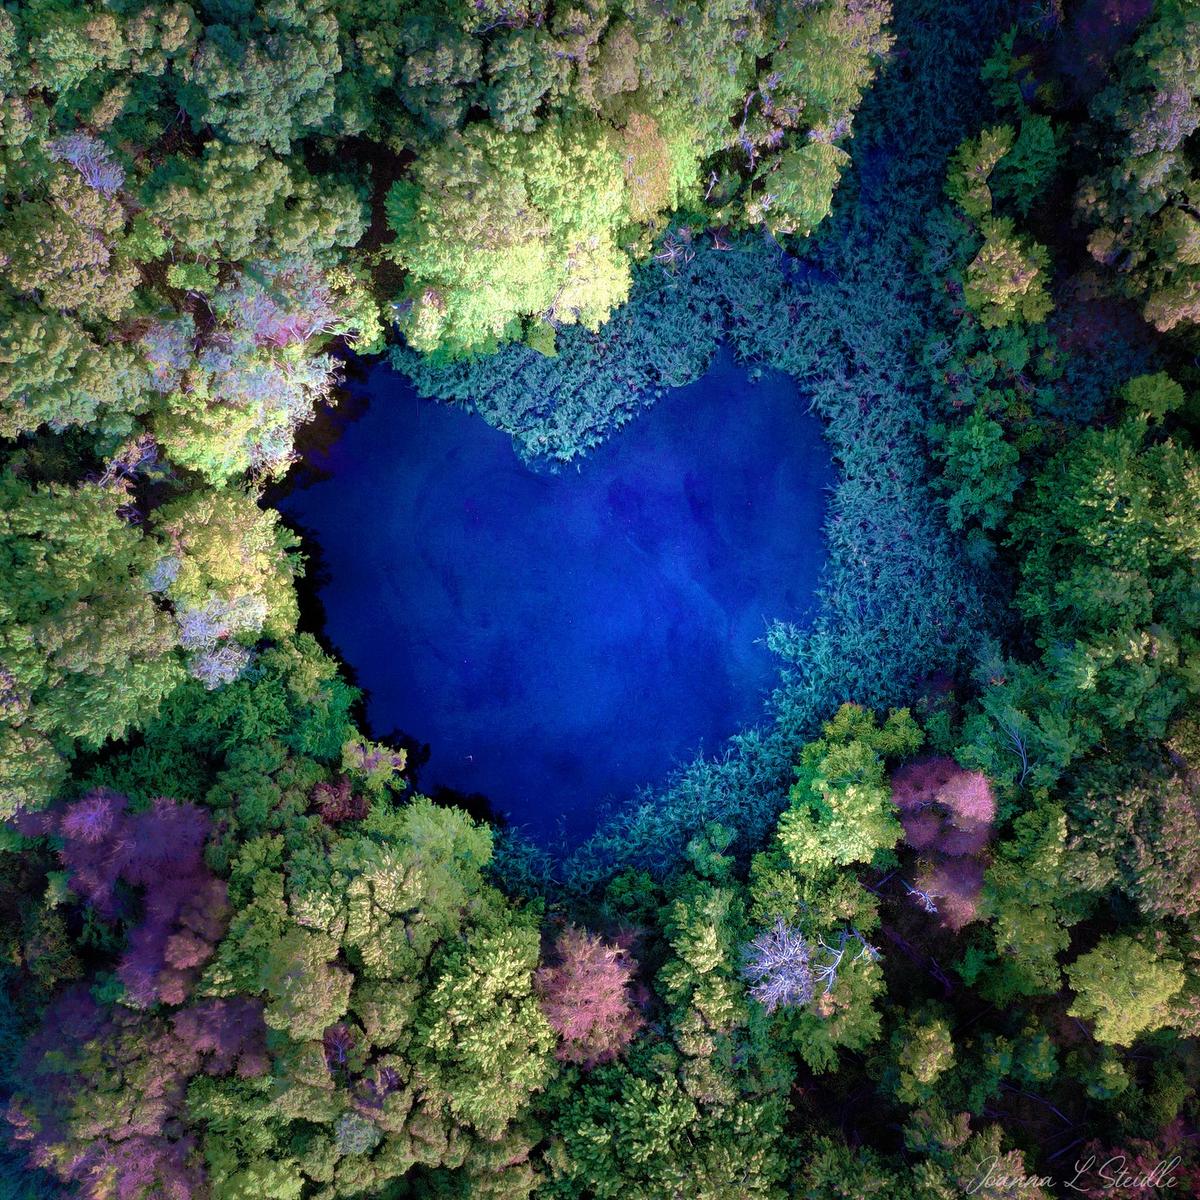 A heart-shaped pond in Morton Wildlife Refuge in Southampton. (Courtesy of <a href="https://www.instagram.com/hamptonsdroneart/">Joanna L Steidle</a>)